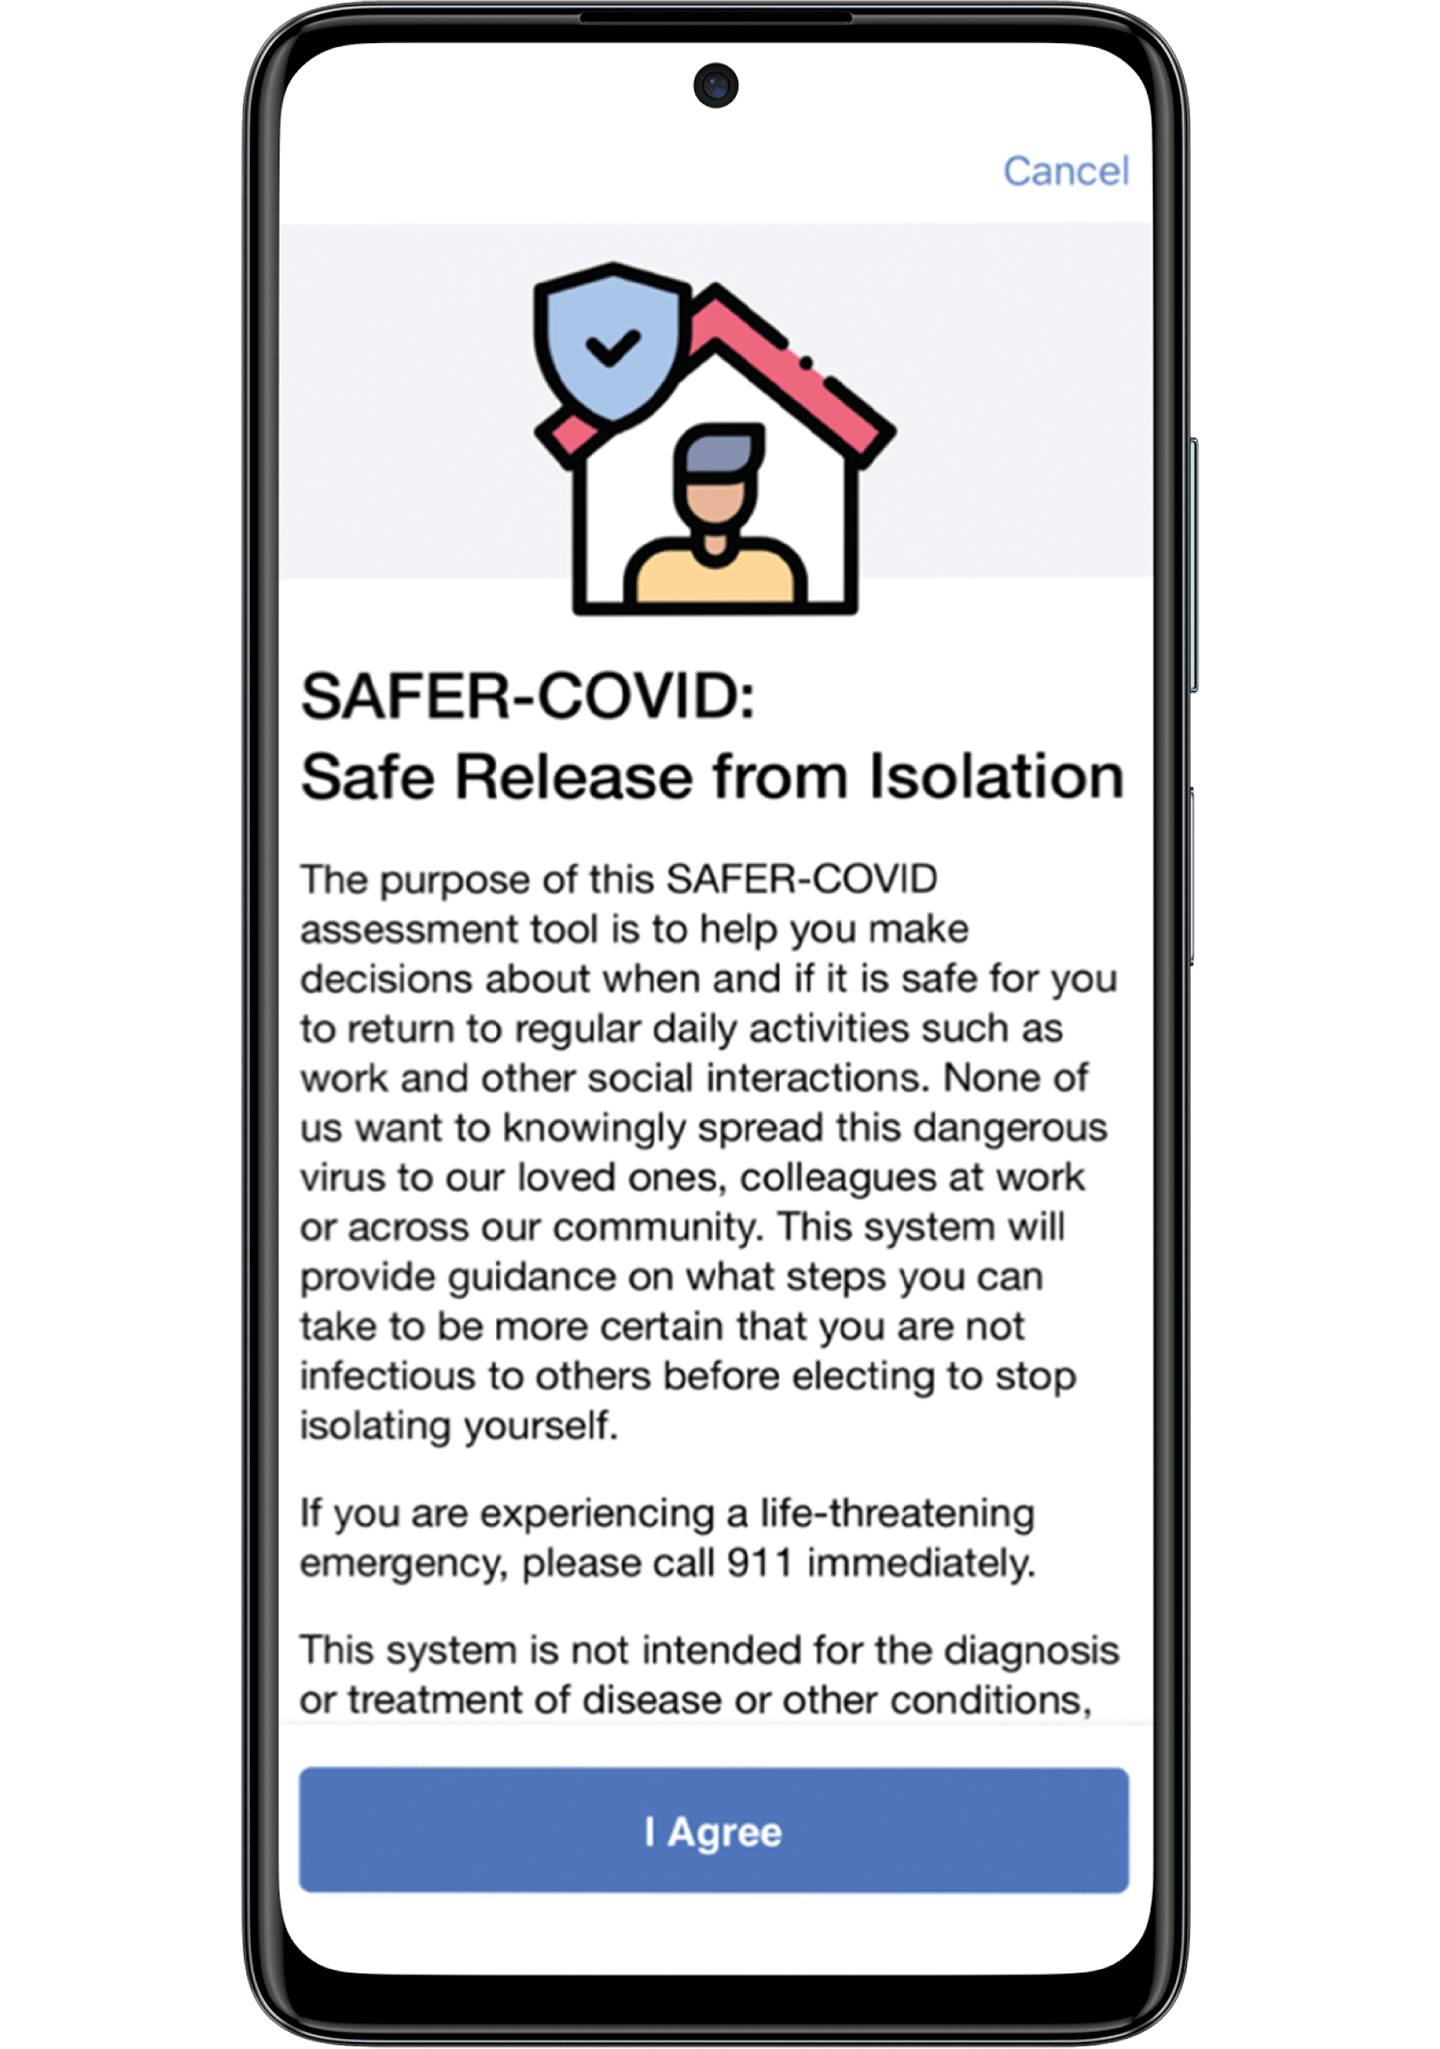 Phone showing an app screen—SAFER-COVID Safe Release from Isolation the text articulates a safety message encouraging users to call 911 if they are experiencing a life-threatening emergency. And that this system is not intended for the diagnosis or treatment of disease or other conditions. button reads: I agree